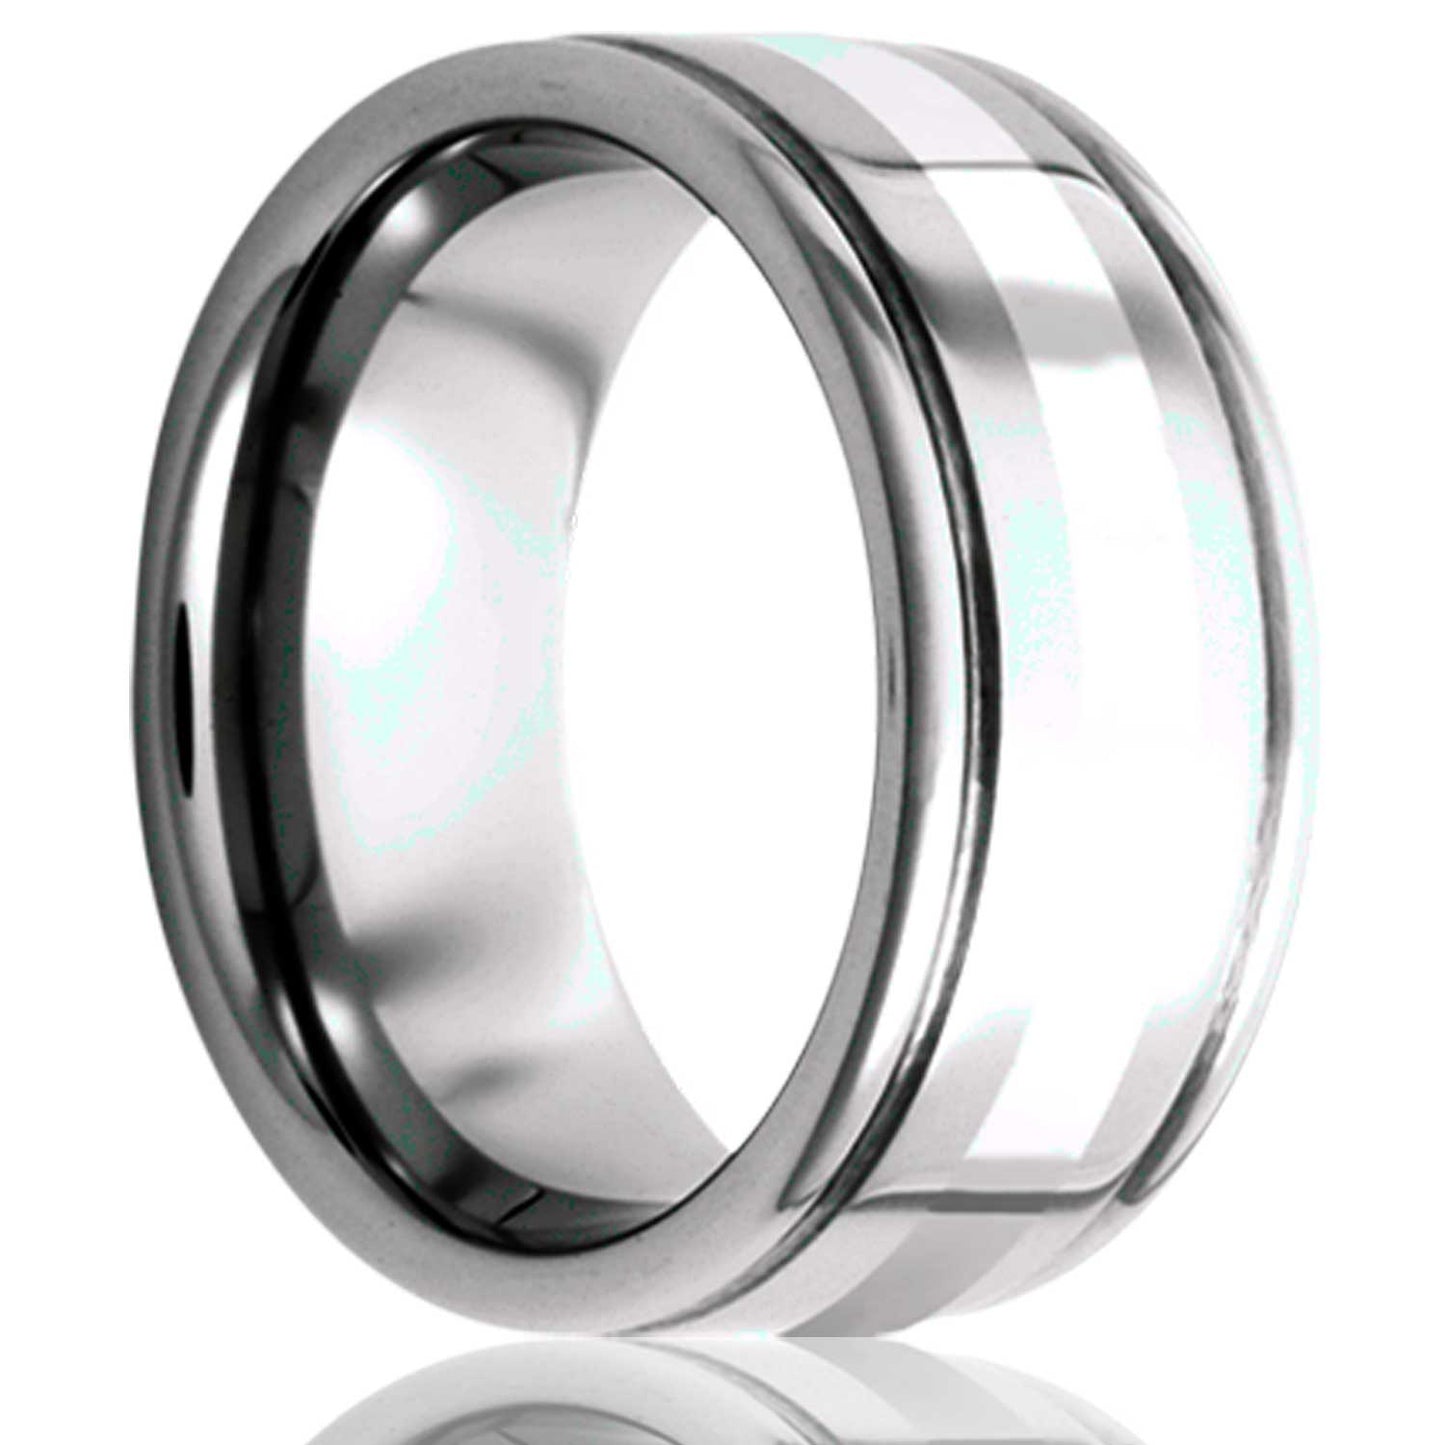 A argentium silver inlay cobalt wedding band with grooved edges displayed on a neutral white background.